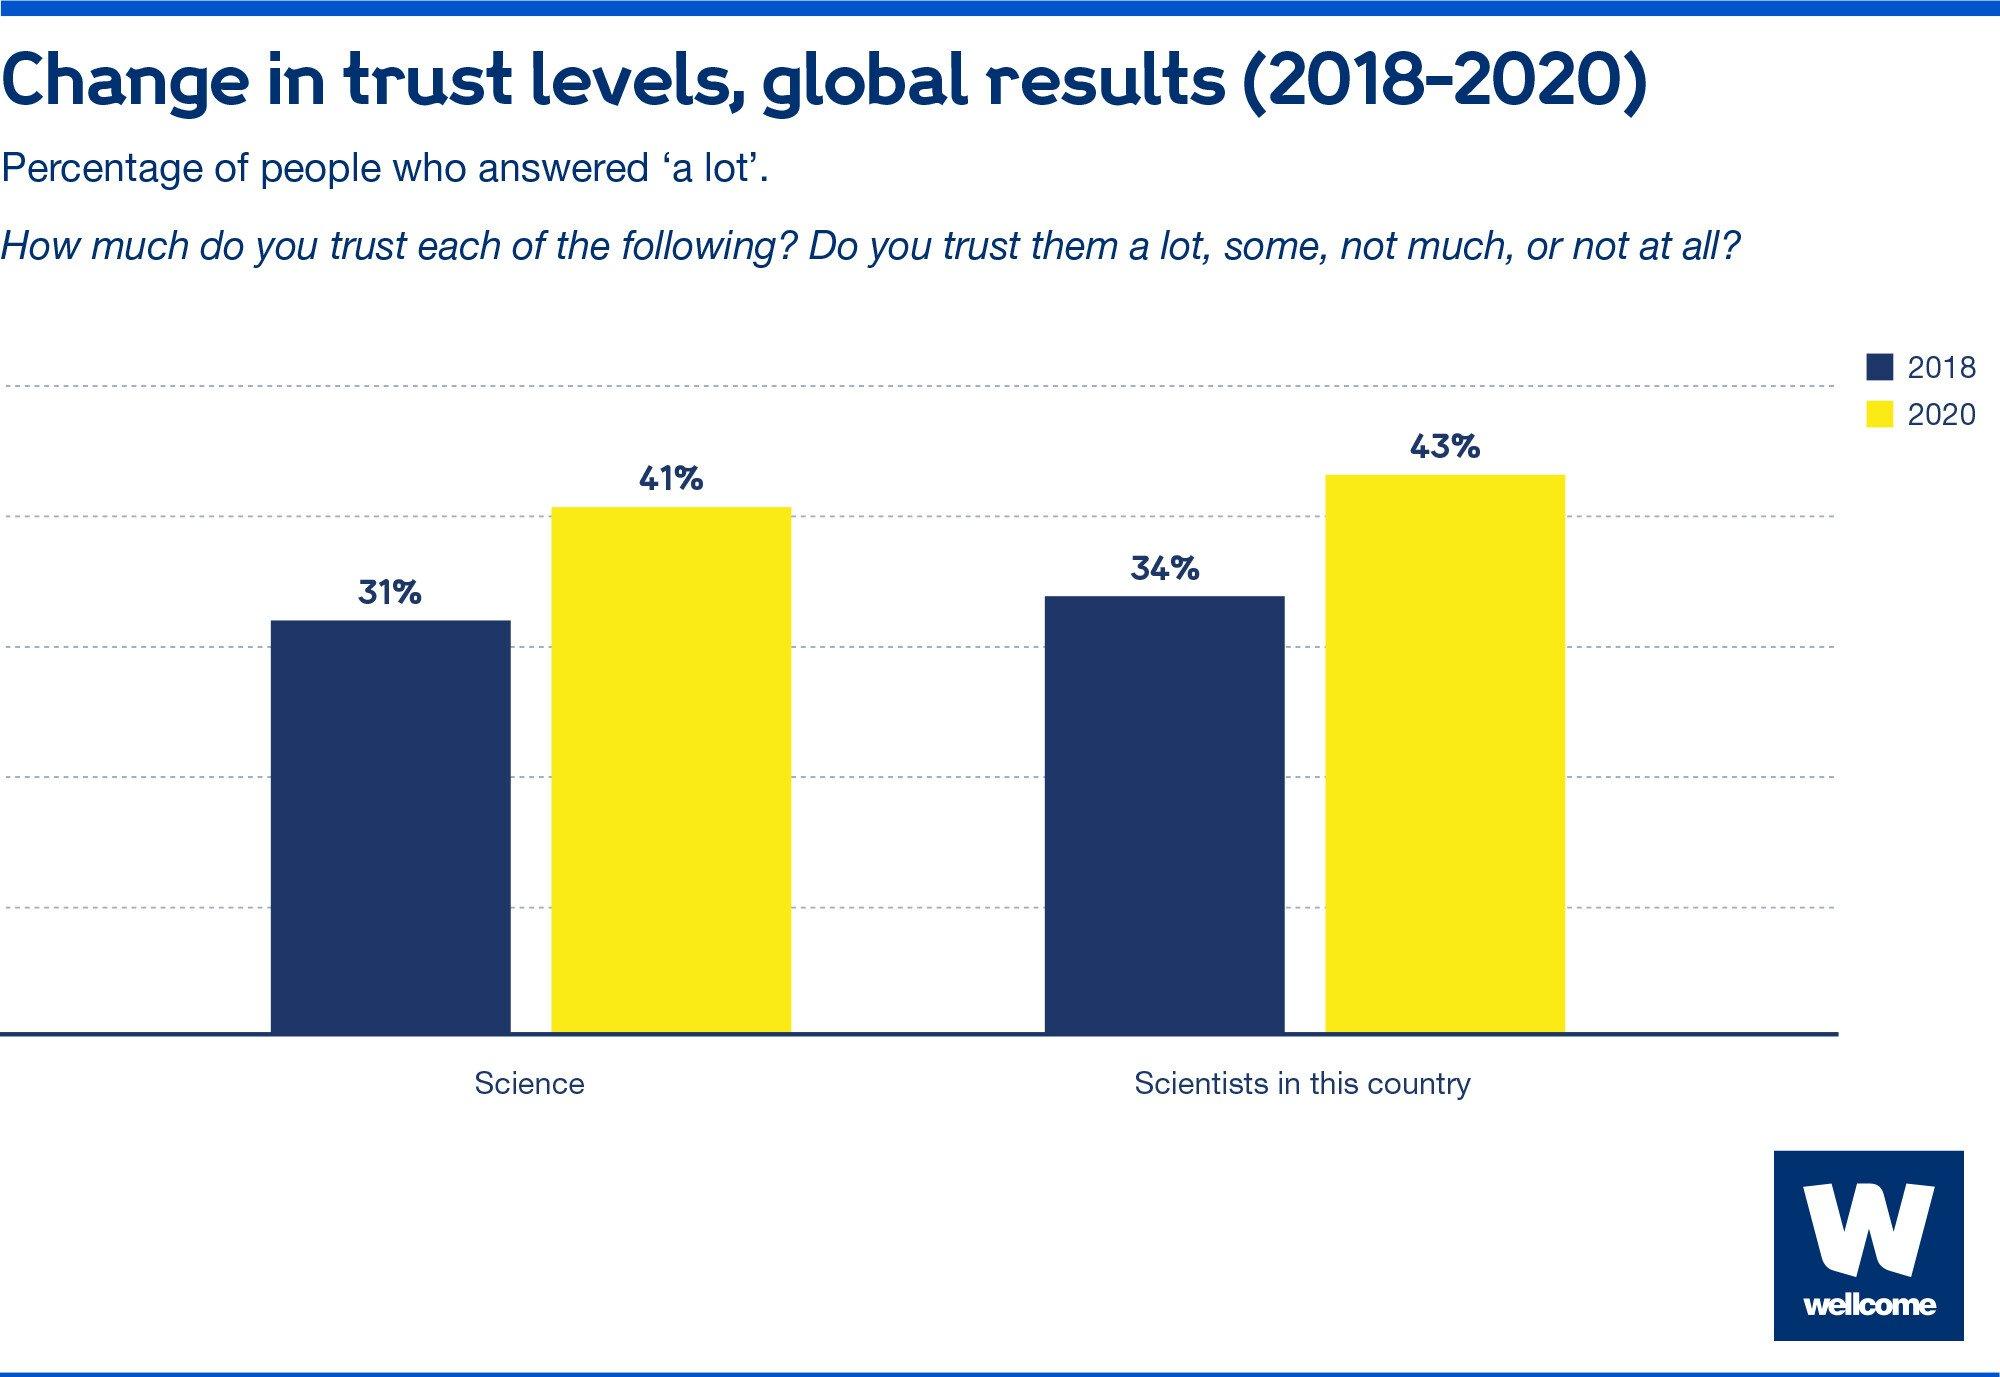 Bar chart to show the change in global trust levels for science and scientists.